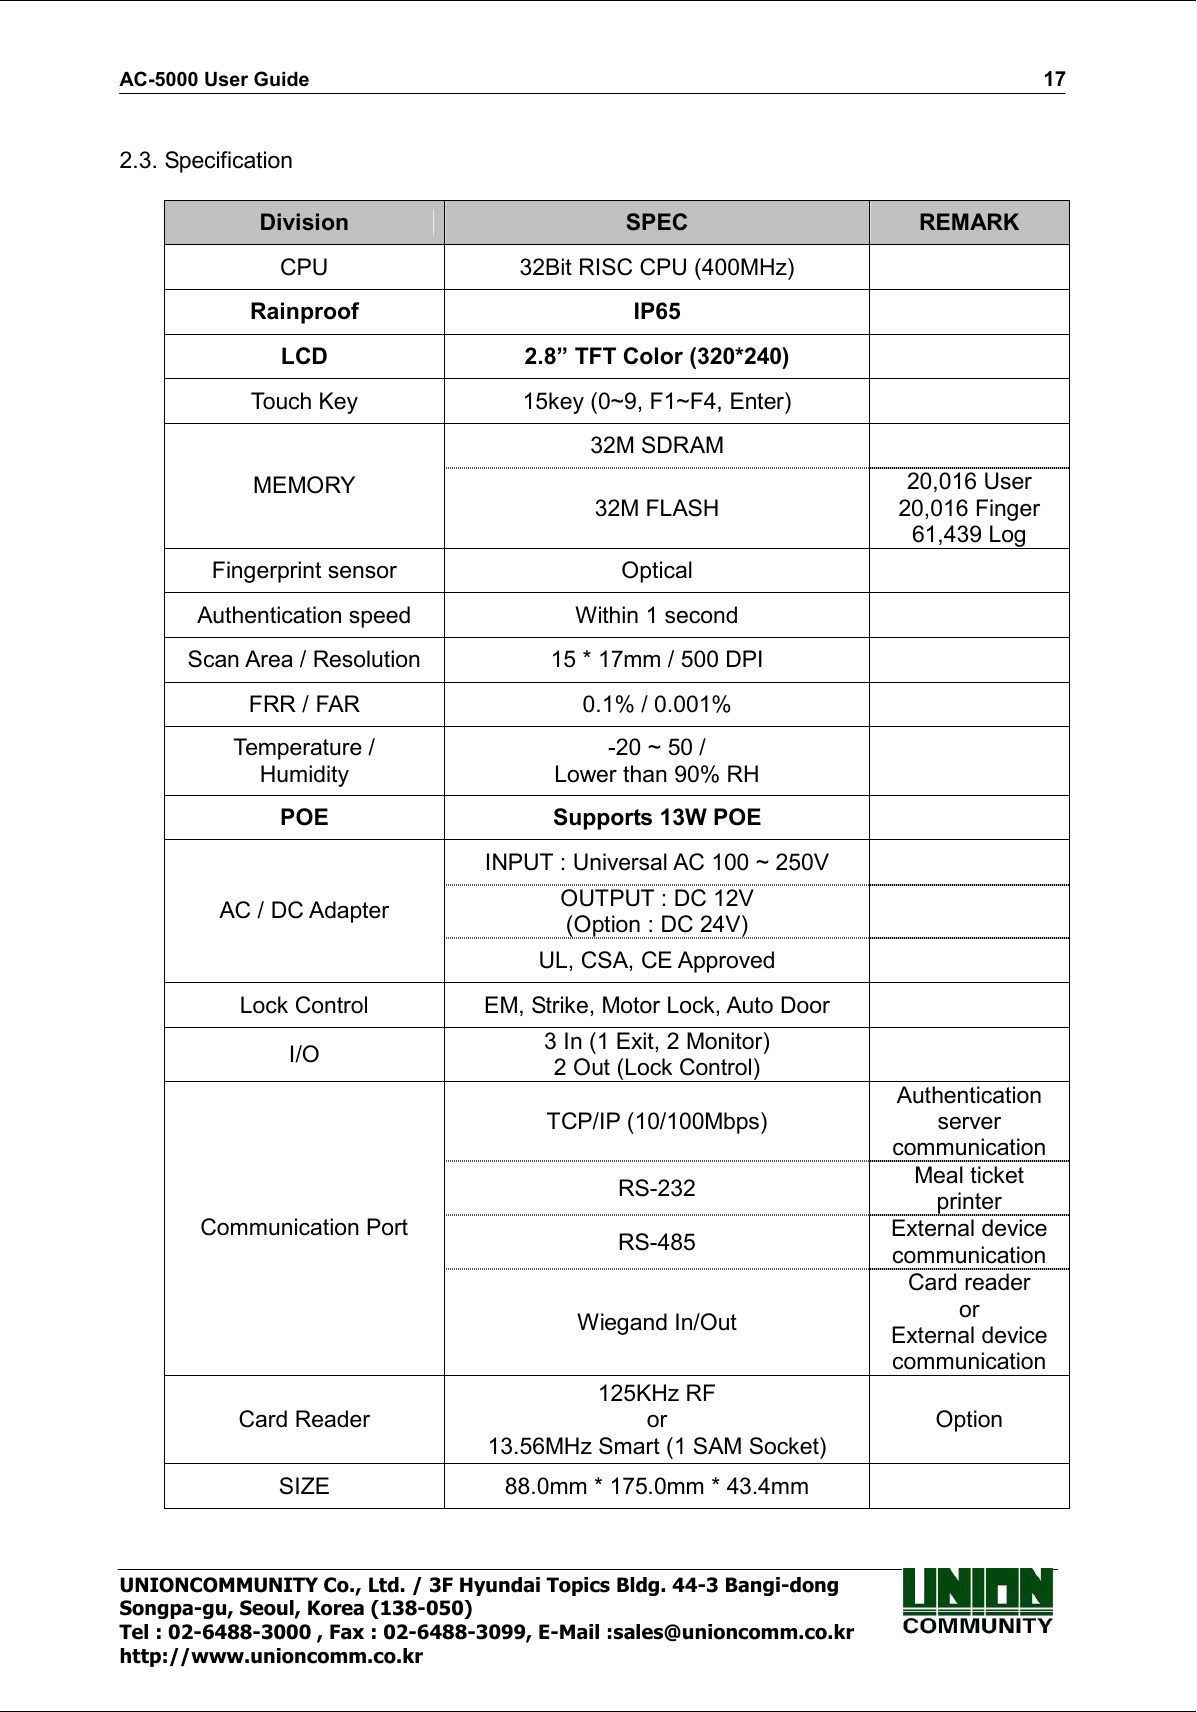 AC-5000 User Guide                                                                                                                                                   17 UNIONCOMMUNITY Co., Ltd. / 3F Hyundai Topics Bldg. 44-3 Bangi-dong Songpa-gu, Seoul, Korea (138-050) Tel : 02-6488-3000 , Fax : 02-6488-3099, E-Mail :sales@unioncomm.co.kr http://www.unioncomm.co.kr  2.3. Specification  Division  SPEC  REMARK CPU  32Bit RISC CPU (400MHz)   Rainproof  IP65   LCD  2.8” TFT Color (320*240)   Touch Key  15key (0~9, F1~F4, Enter)   32M SDRAM   MEMORY 32M FLASH 20,016 User 20,016 Finger 61,439 Log Fingerprint sensor  Optical   Authentication speed  Within 1 second   Scan Area / Resolution  15 * 17mm / 500 DPI   FRR / FAR  0.1% / 0.001%   Temperature / Humidity -20 ~ 50 / Lower than 90% RH   POE  Supports 13W POE   INPUT : Universal AC 100 ~ 250V   OUTPUT : DC 12V (Option : DC 24V)   AC / DC Adapter UL, CSA, CE Approved   Lock Control  EM, Strike, Motor Lock, Auto Door   I/O  3 In (1 Exit, 2 Monitor) 2 Out (Lock Control)   TCP/IP (10/100Mbps) Authentication server communication RS-232  Meal ticket printer RS-485  External device communication Communication Port Wiegand In/Out Card reader or External device communication Card Reader 125KHz RF or 13.56MHz Smart (1 SAM Socket) Option SIZE  88.0mm * 175.0mm * 43.4mm    